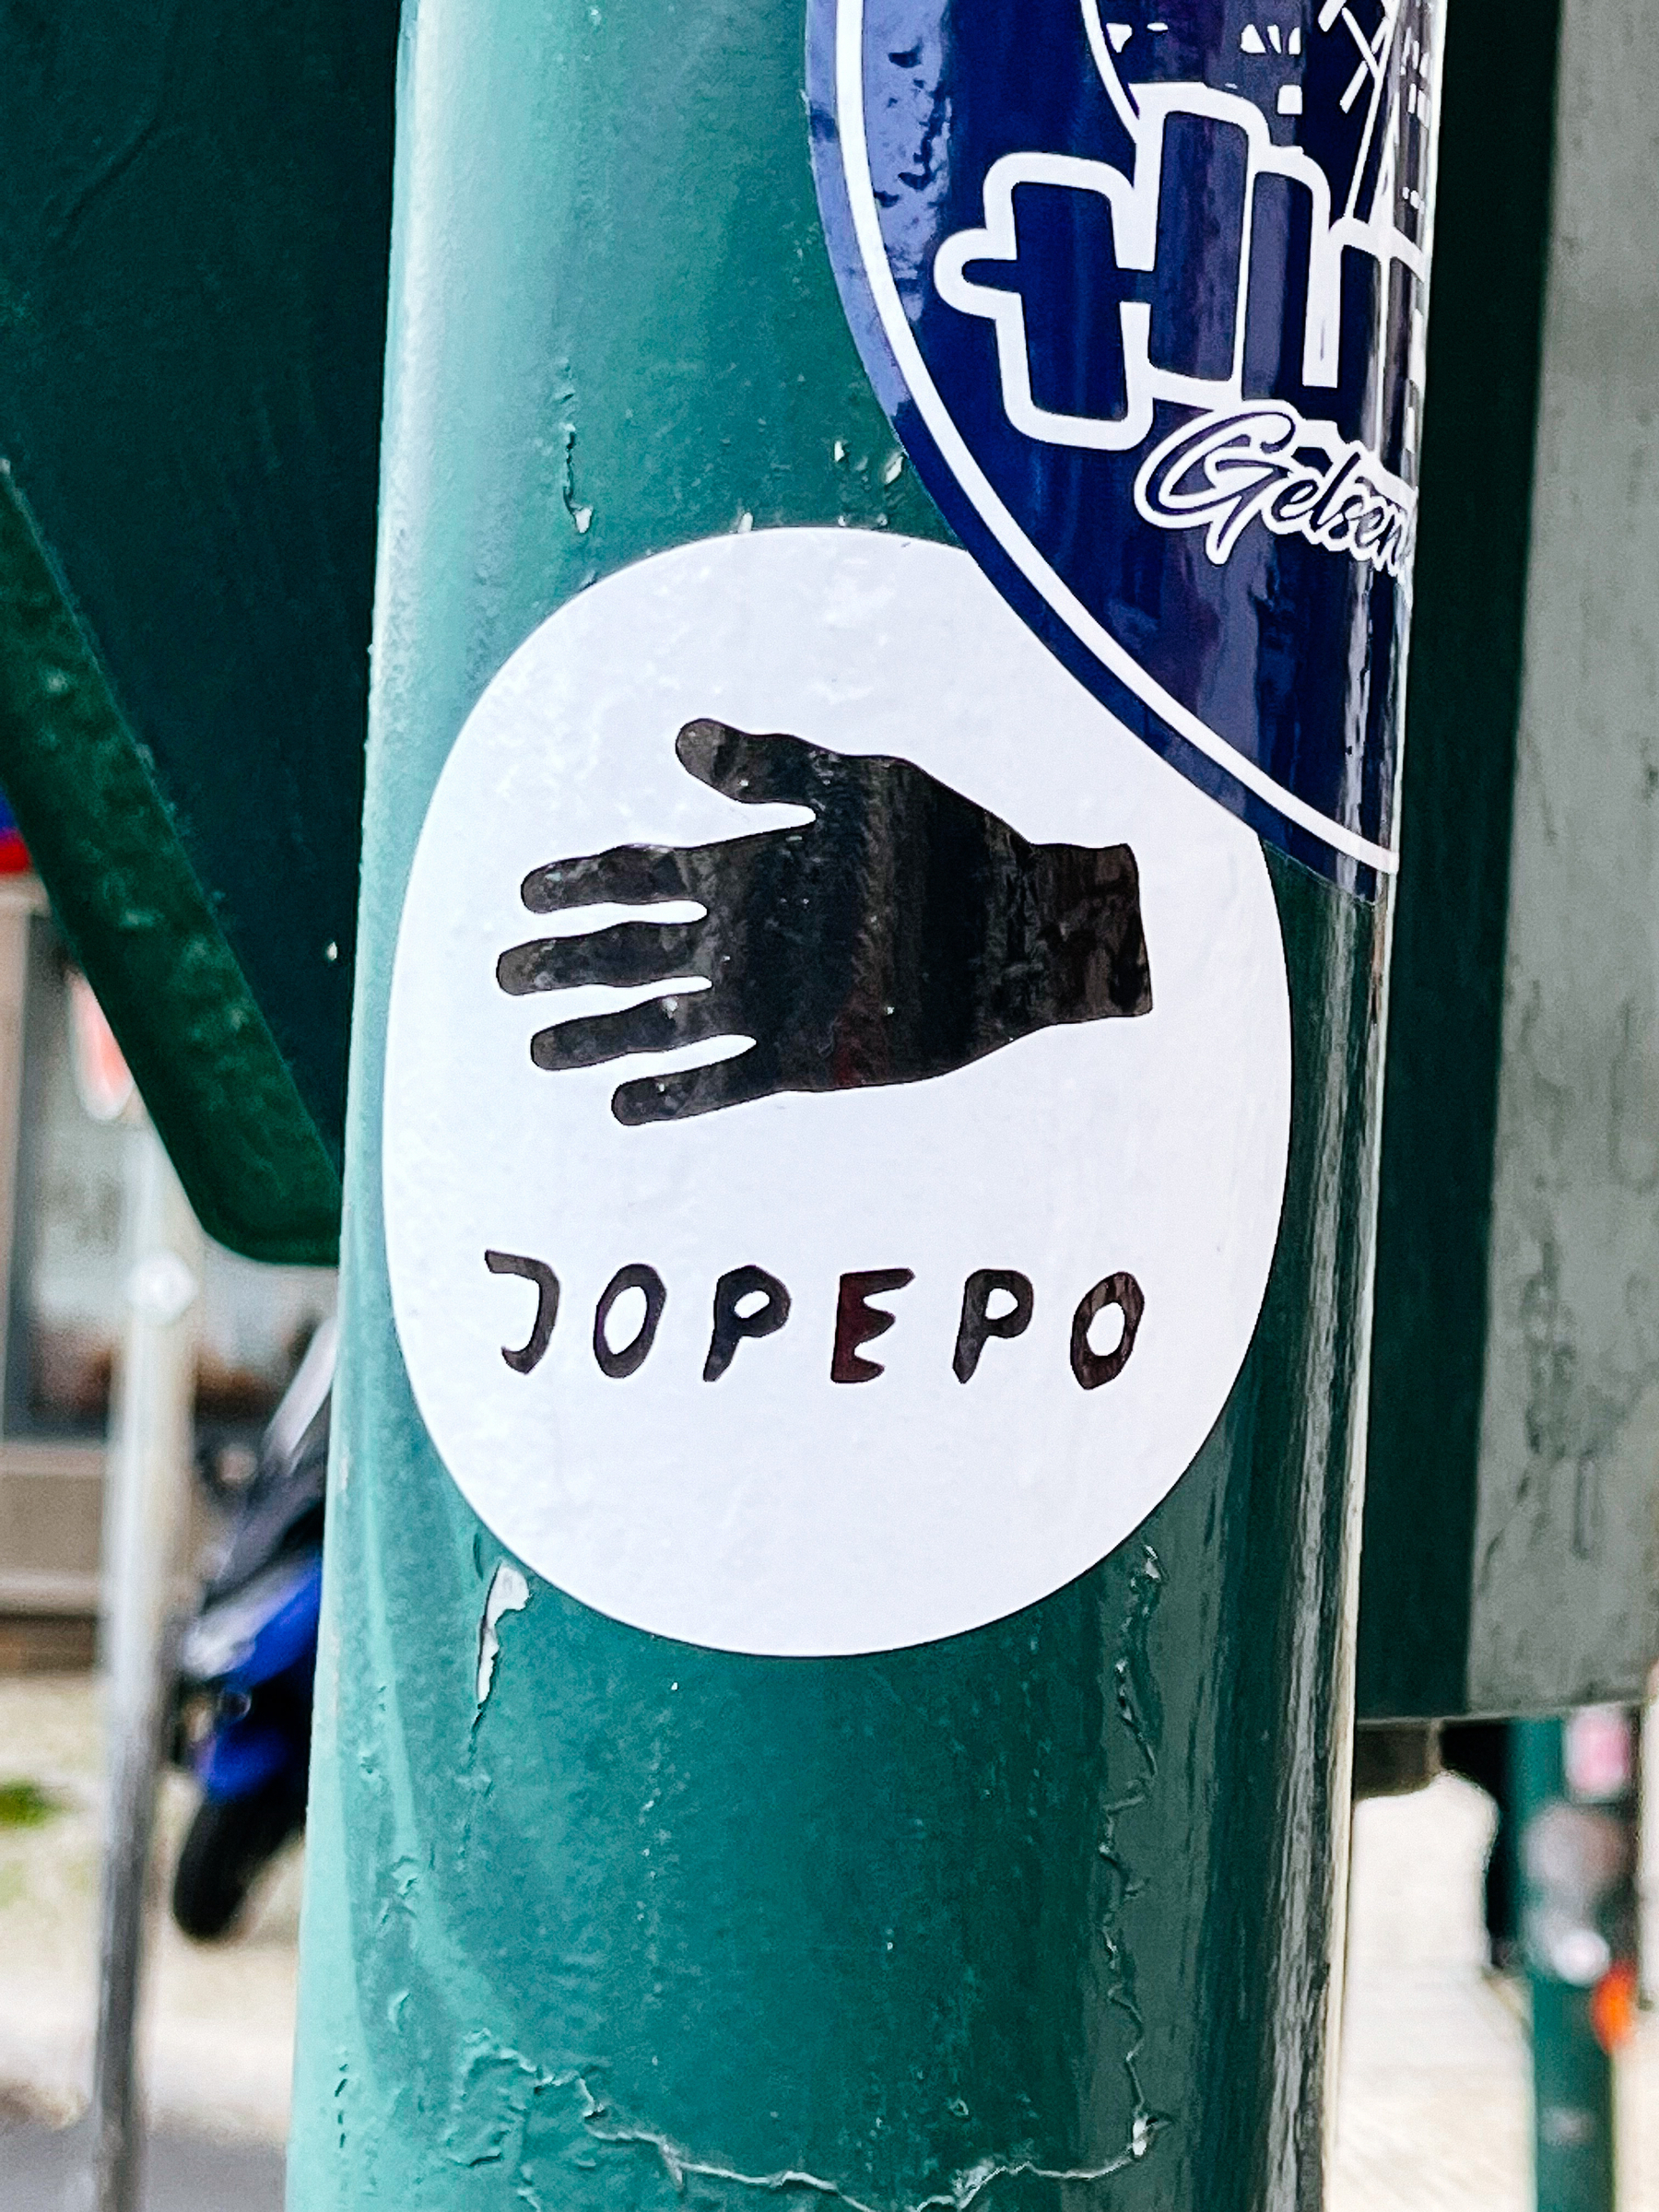 Sticker with the drawing of a hand and the word “Jopepo”. 